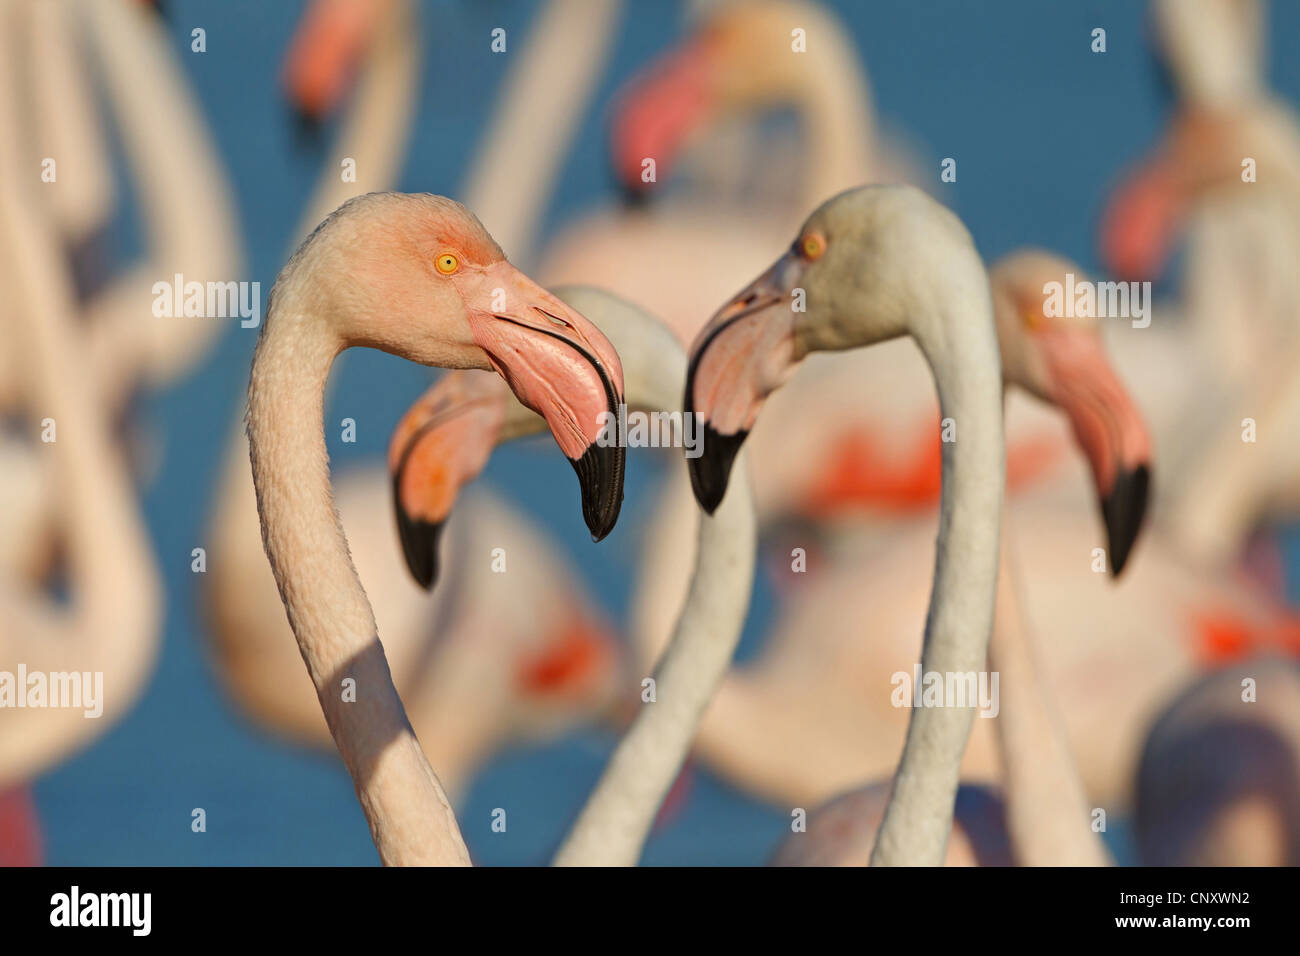 greater flamingo (Phoenicopterus roseus, Phoenicopterus ruber roseus), portrait of a bird in a colony, France, Provence, Camargue Stock Photo